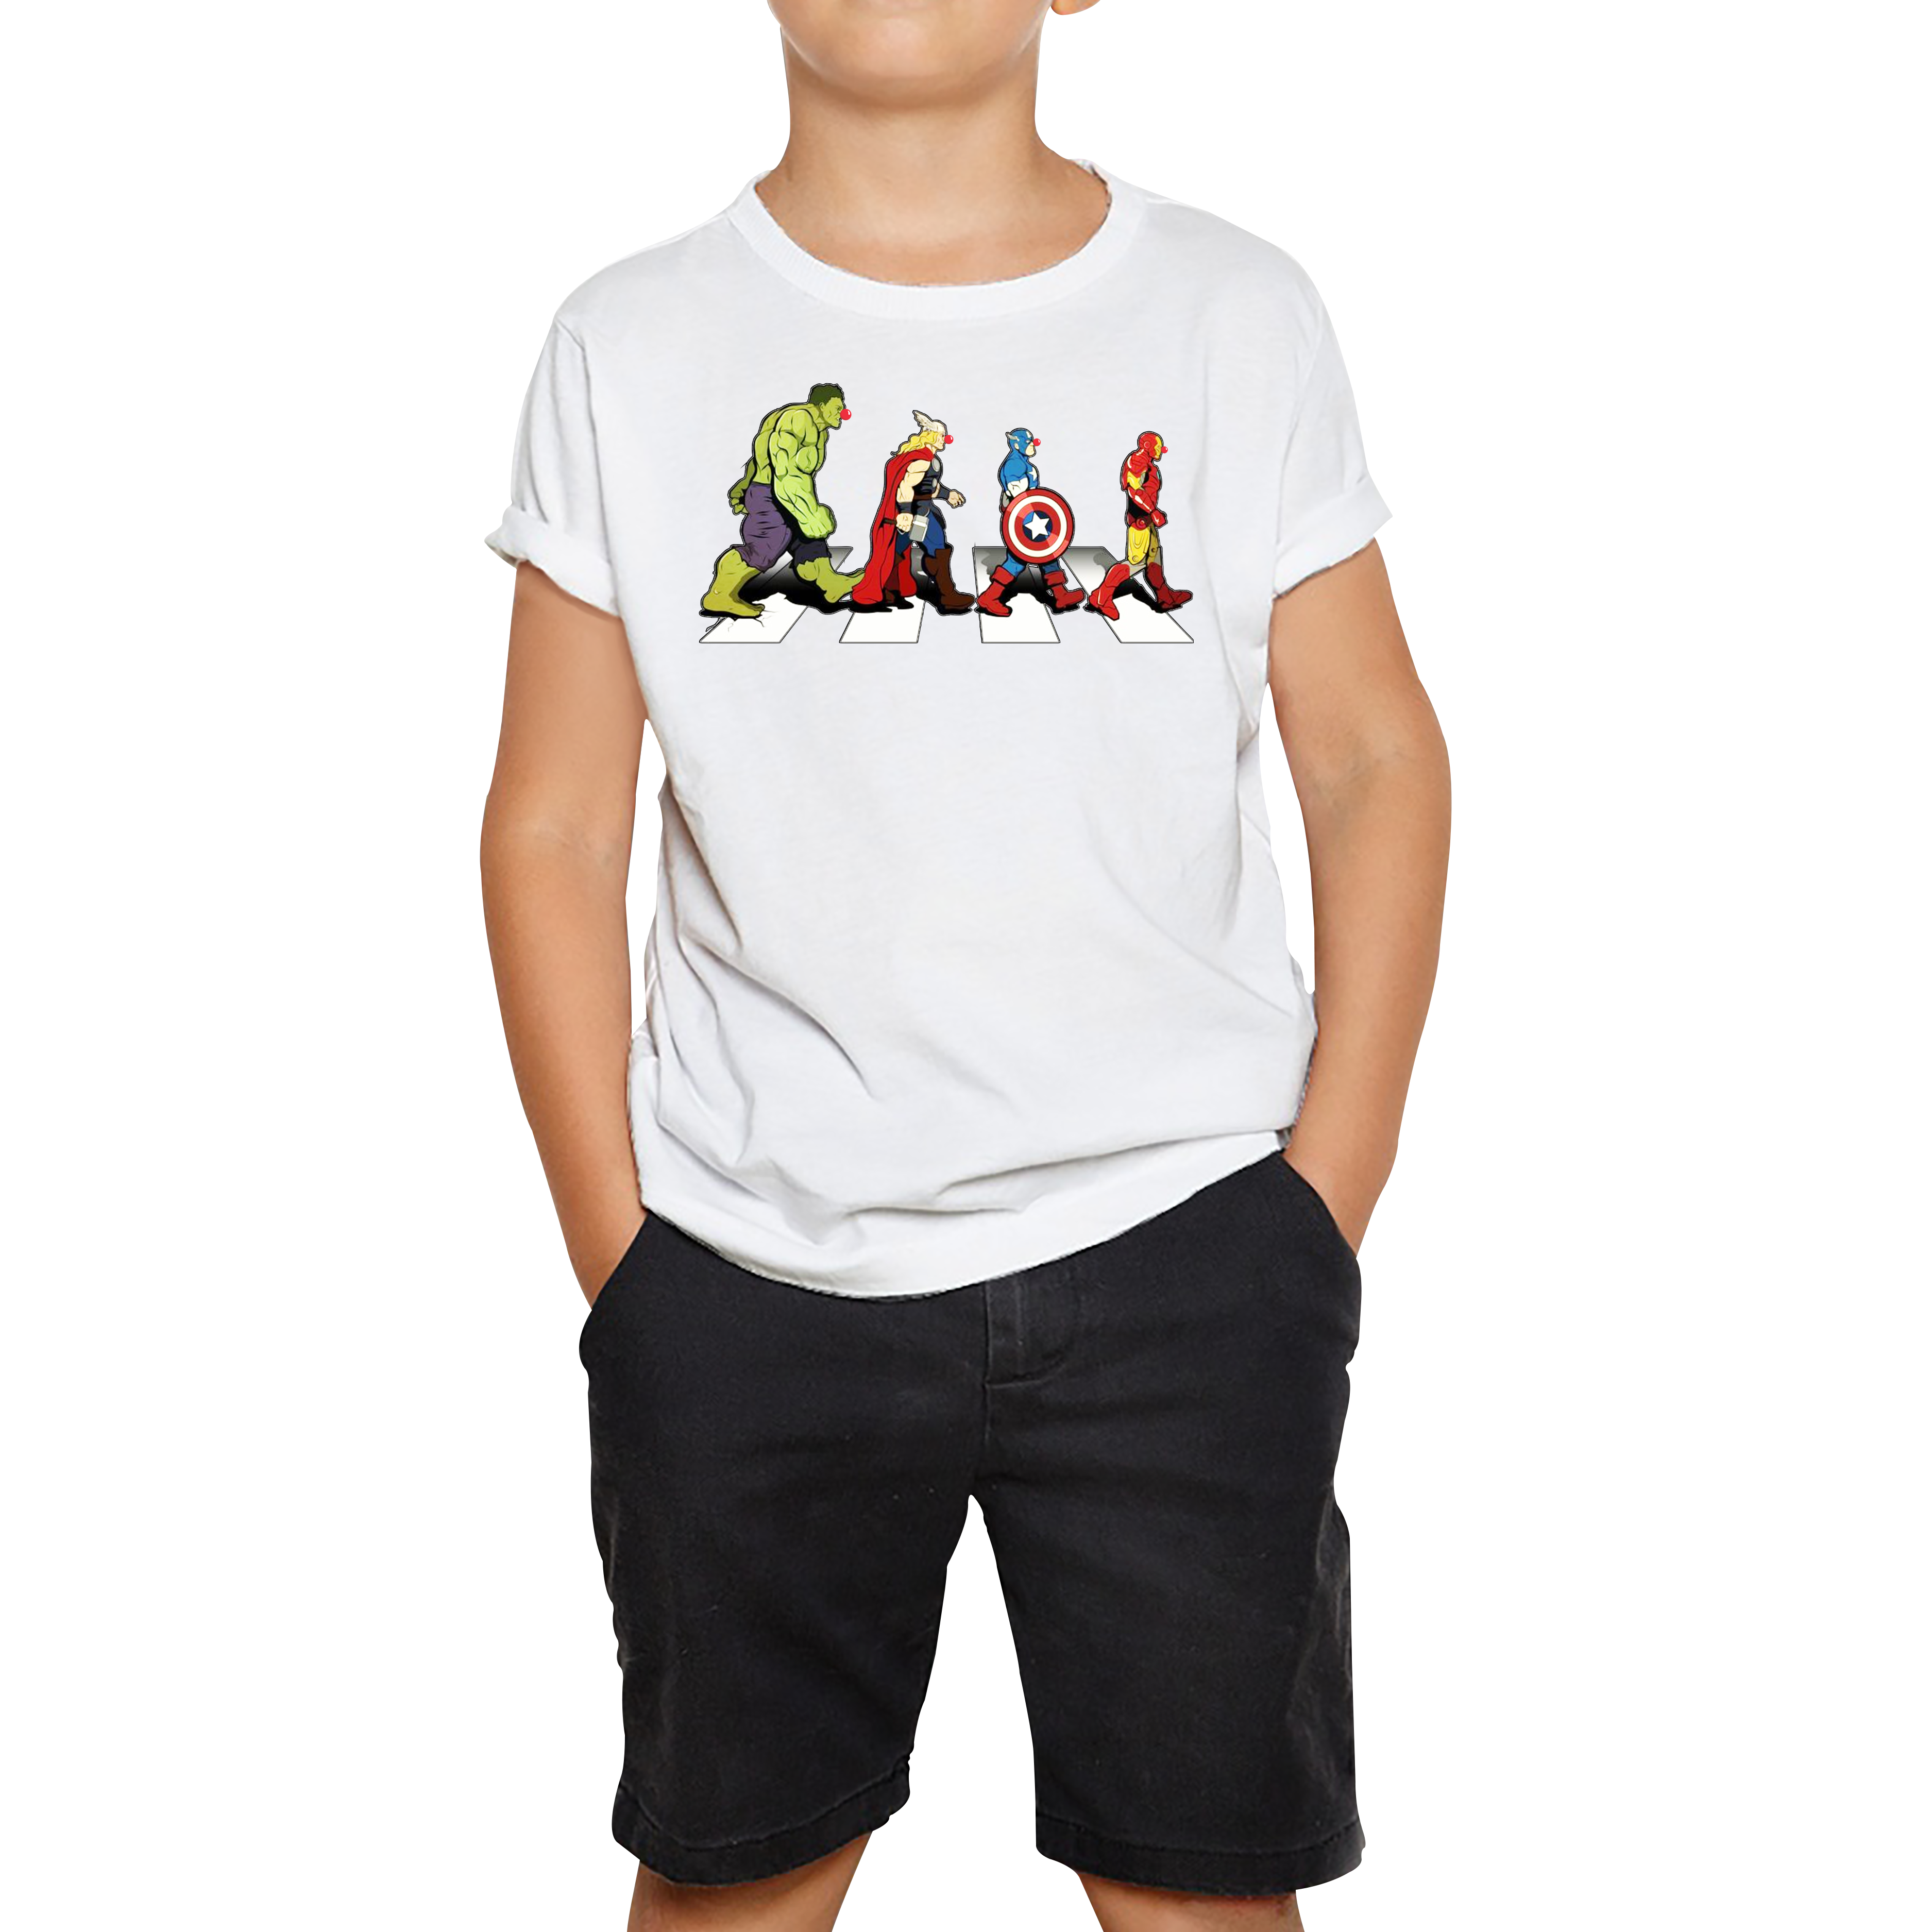 Hulk Thor Captain America Iron Man Marvel Avengers Abbey Road Red Nose Day Kids T Shirt. 50% Goes To Charity